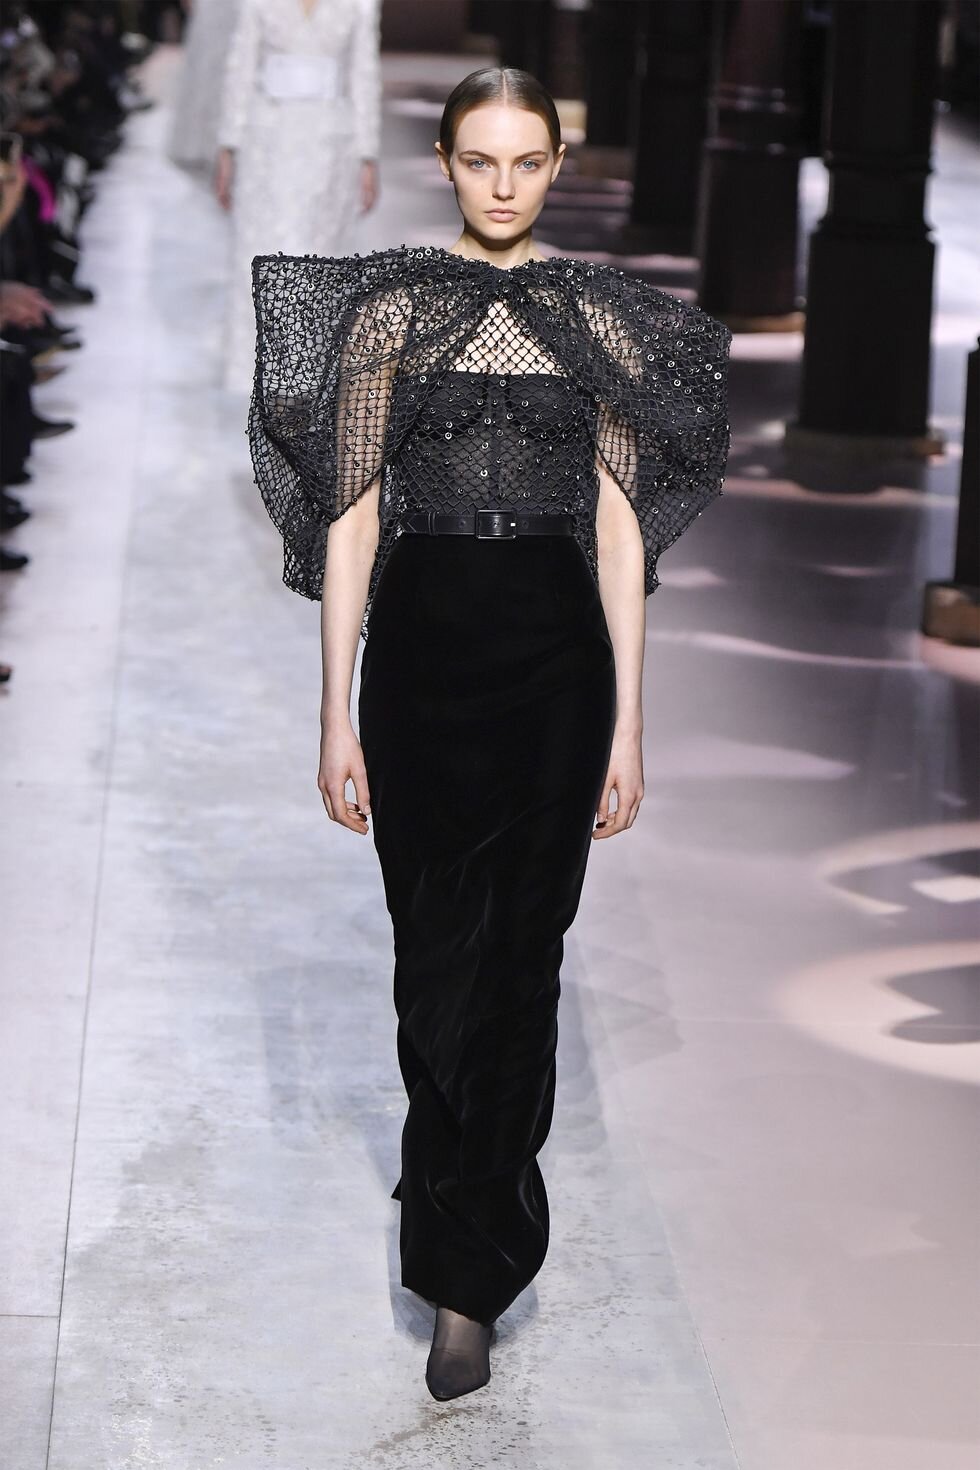 hbz-couture-2020-givenchy-04-1579723508.jpg